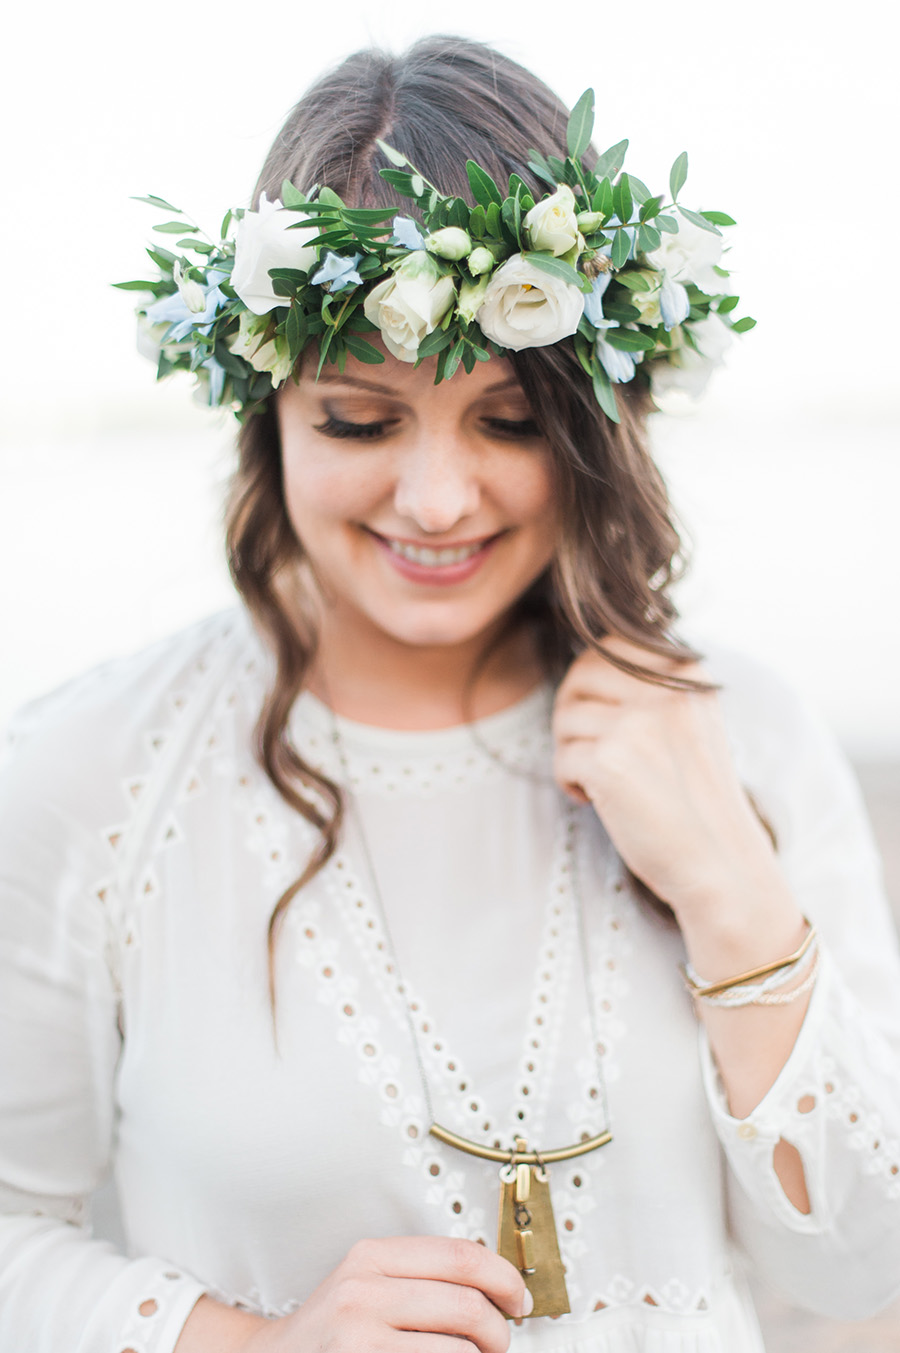 Flower crown with white summer dress and brass necklace | A Side of Vogue, fashion and lifestyle blog